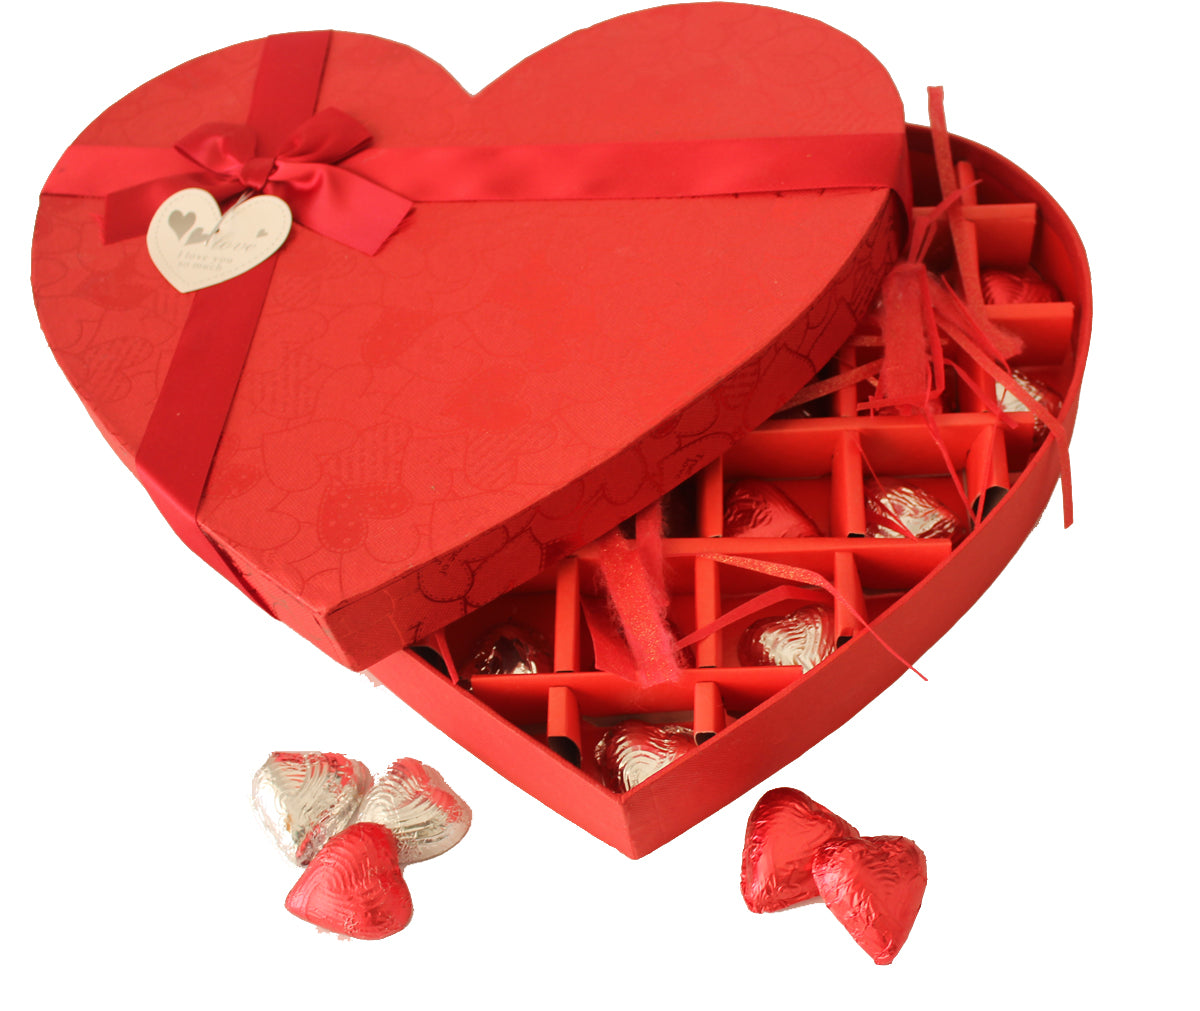 Valentines day special red heart box with 25 red and silver wrapper having milk chocolates.